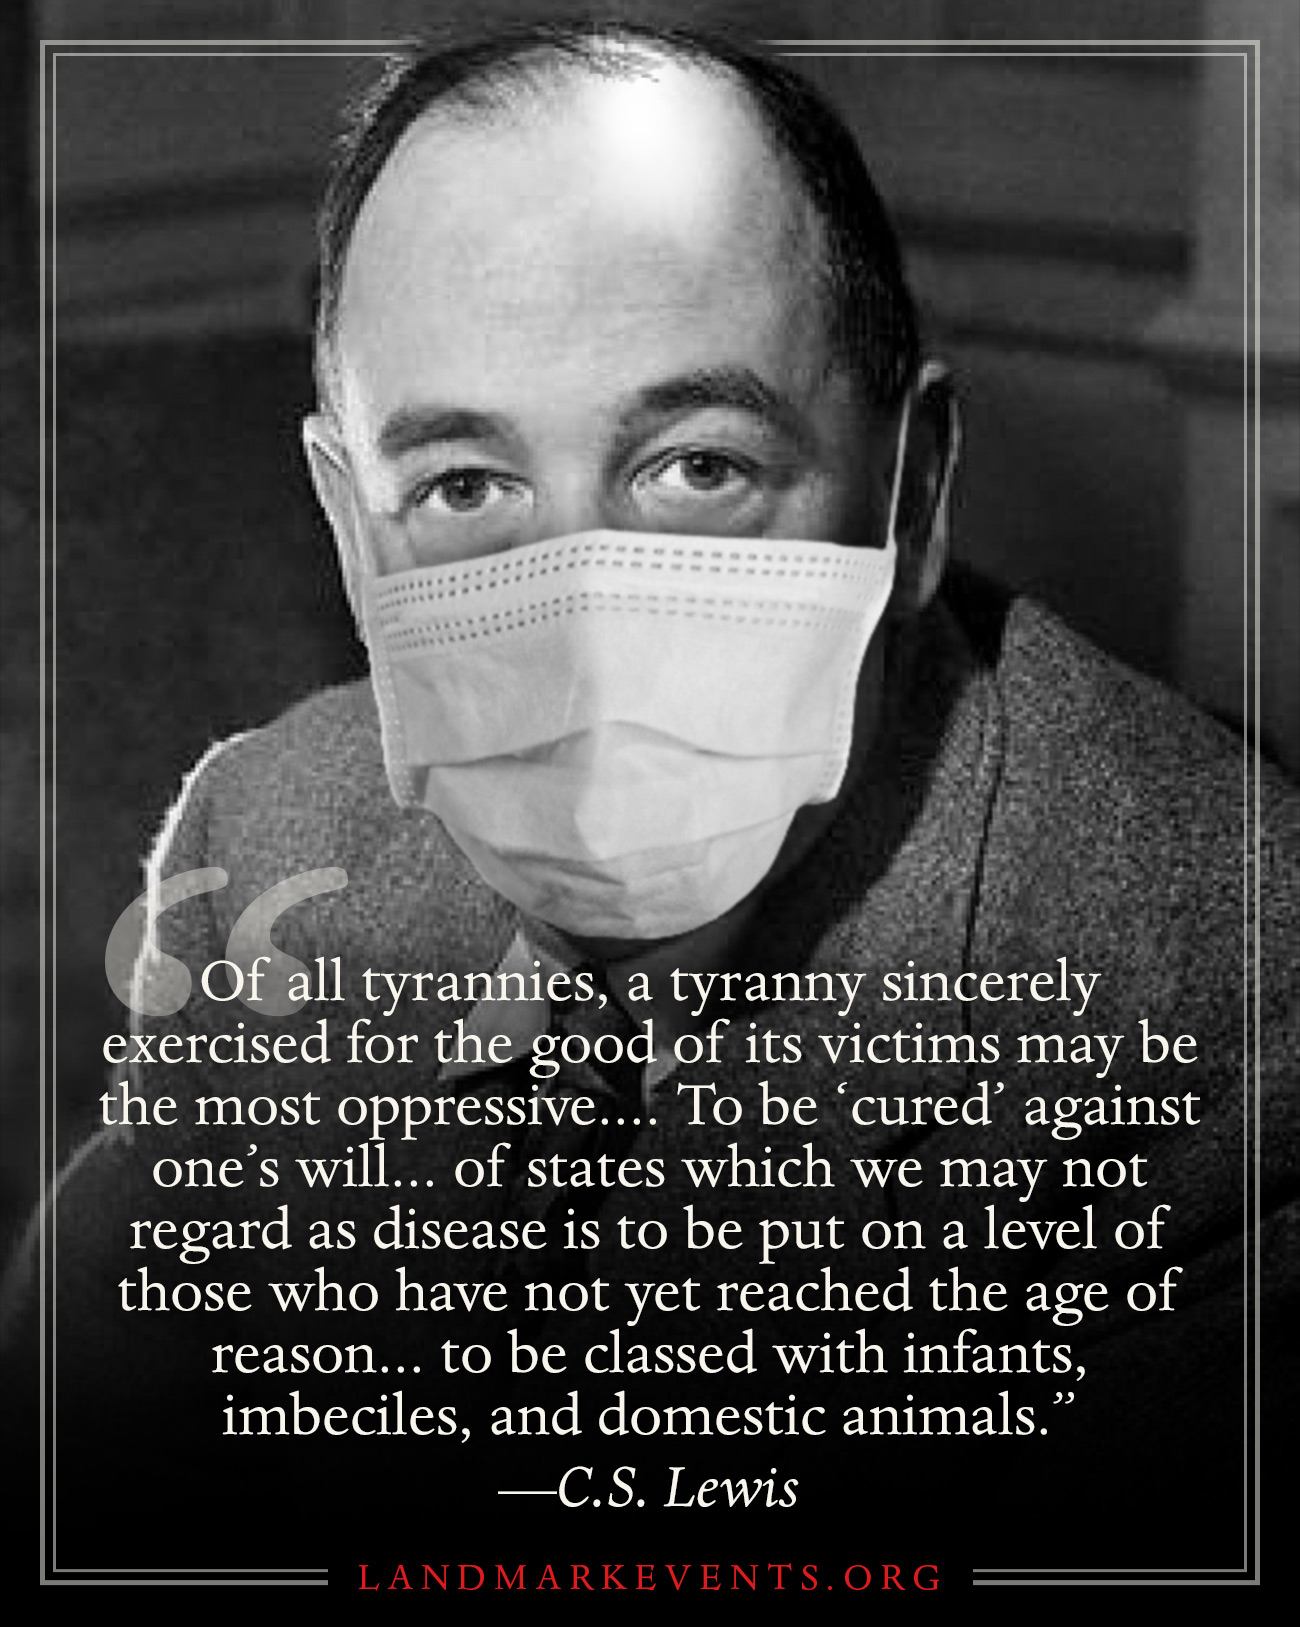 Voices from the Past - C.S. Lewis on Tyranny